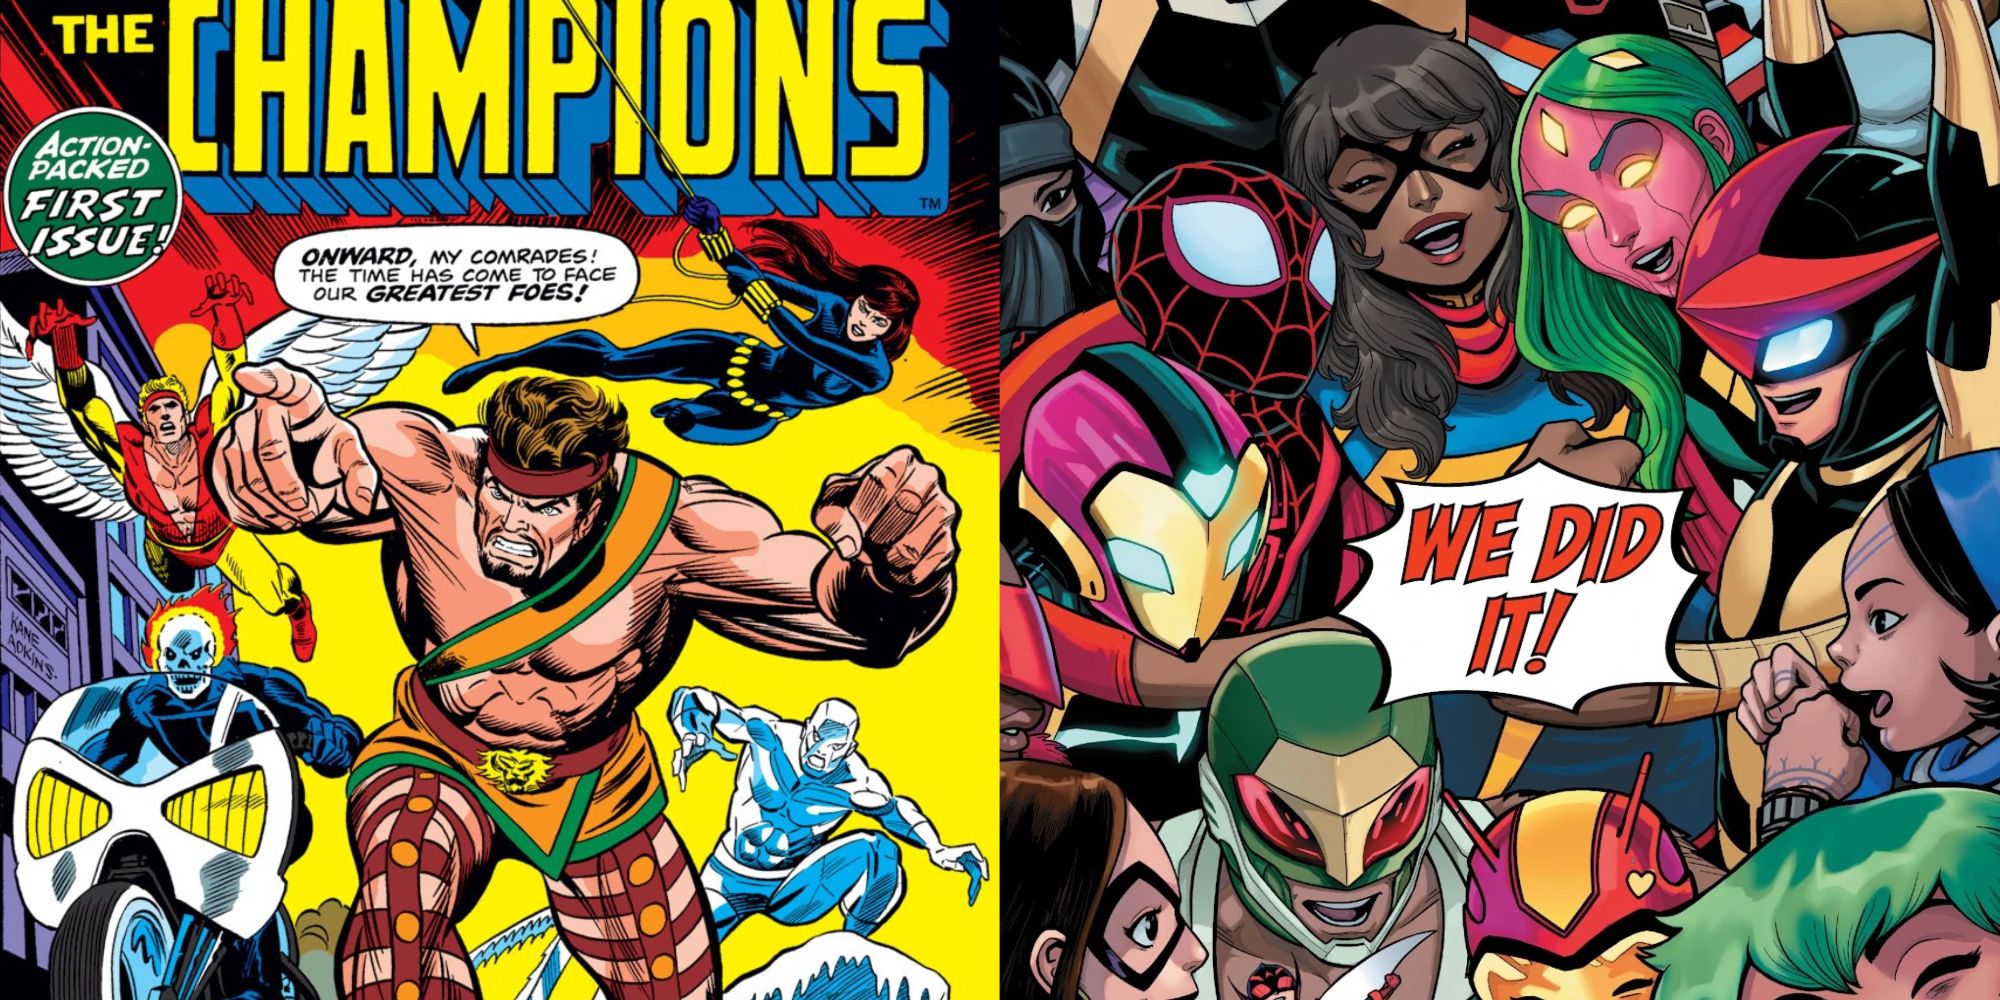 Split image of the original Champions team and the 2016 version from Marvel Comics.